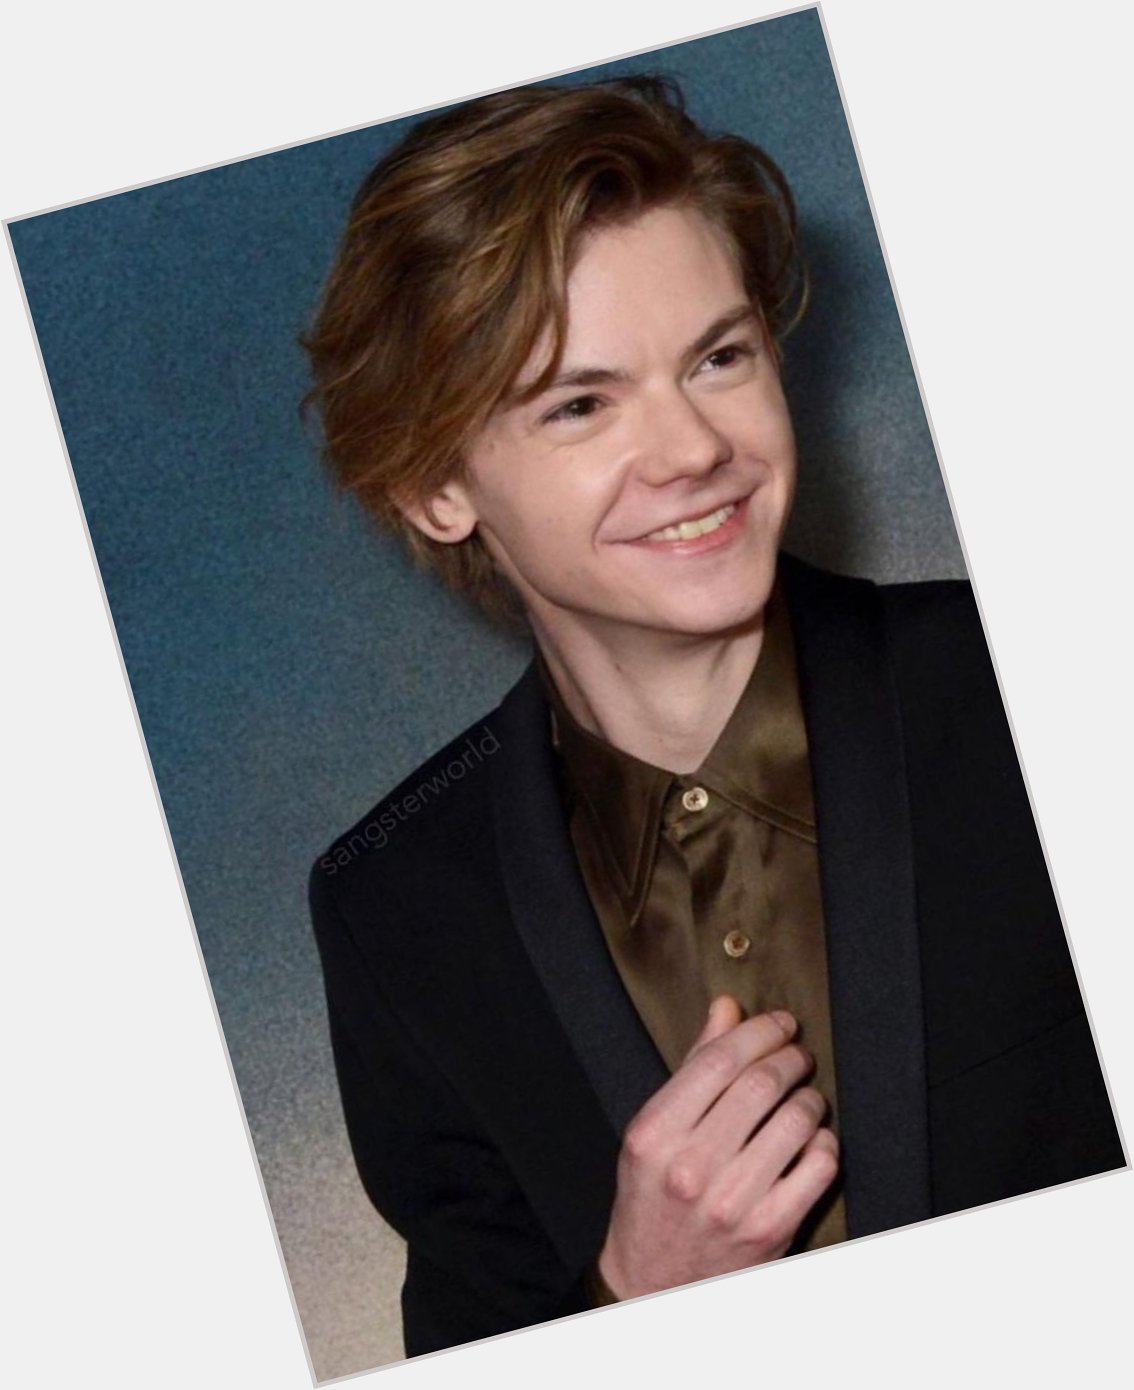 Happy 30th birthday to the human puppy Thomas Brodie-Sangster 